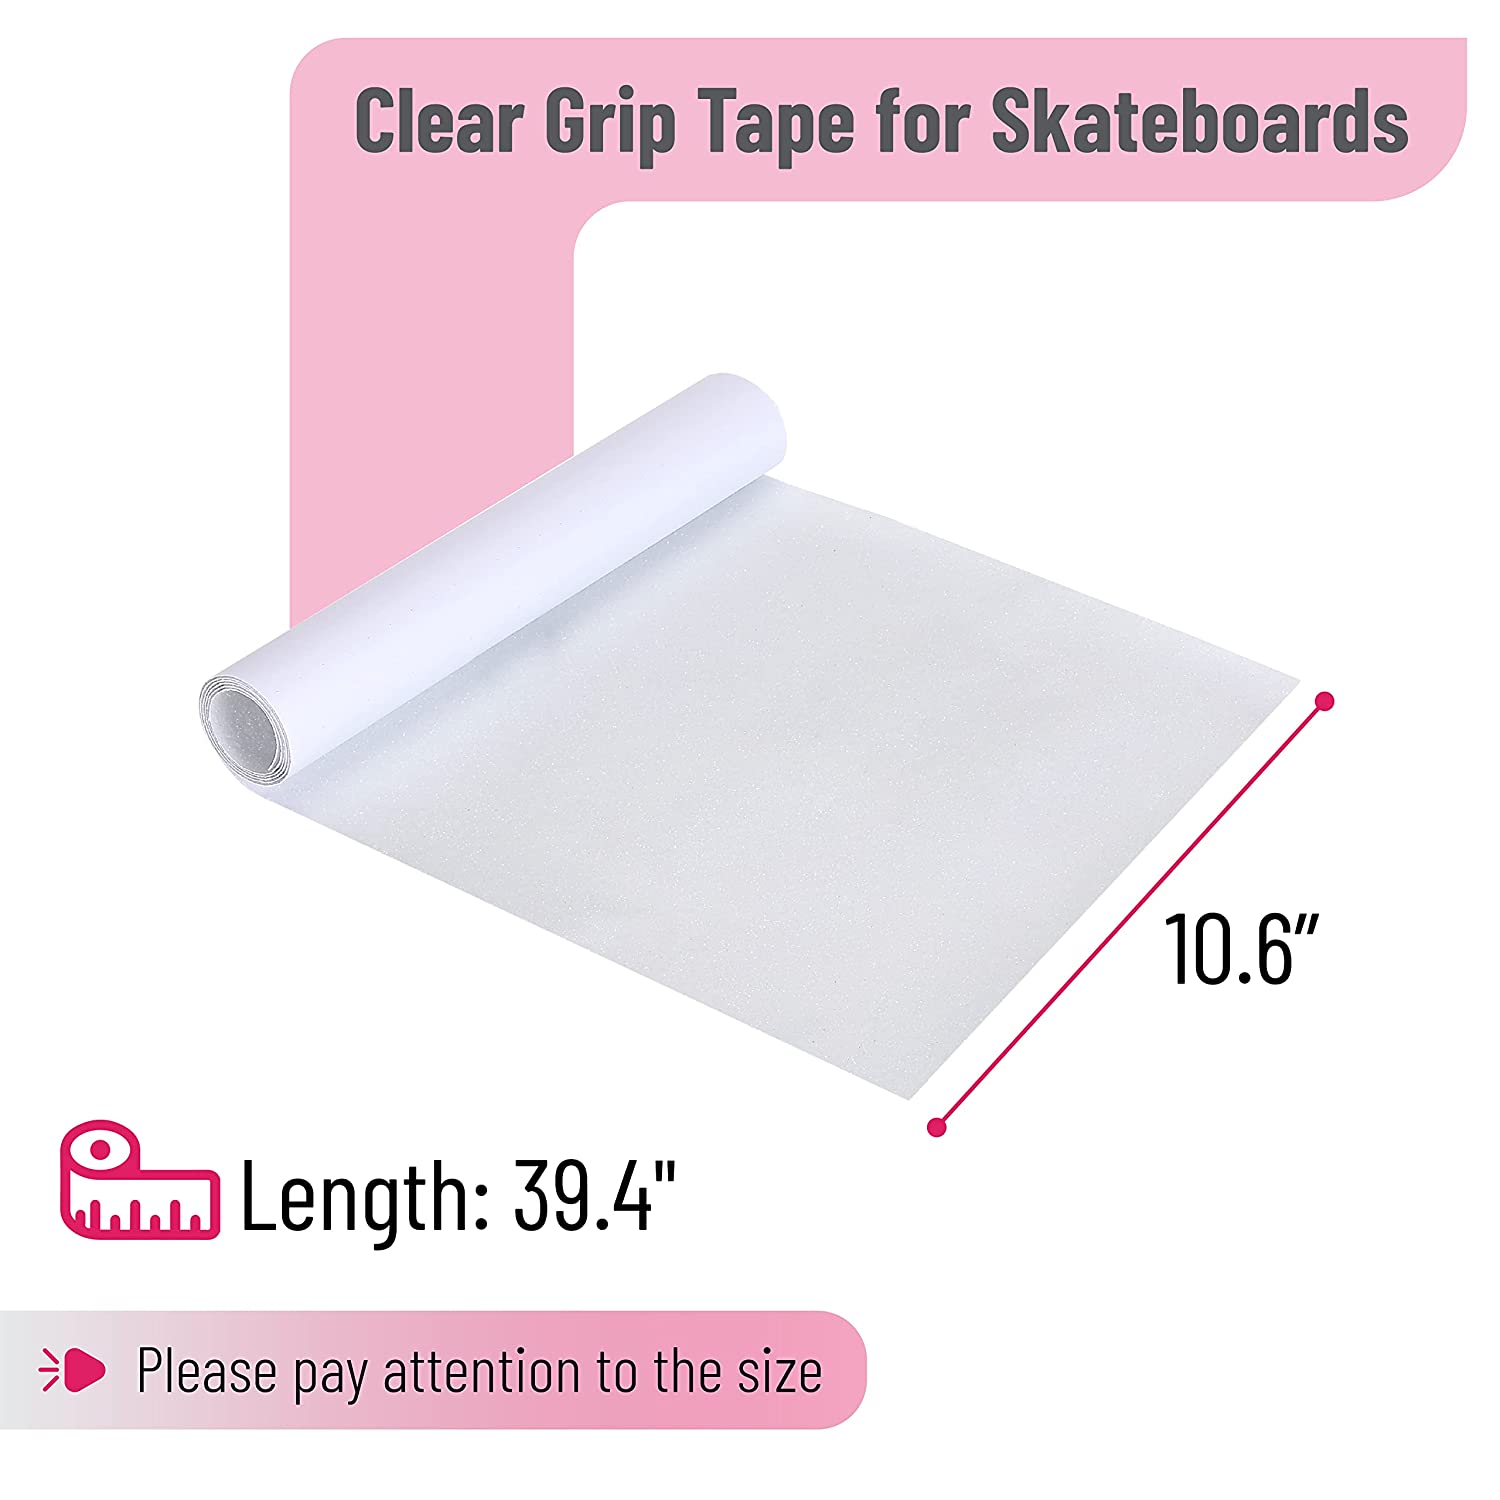 Mr. Pen- Clear Grip Tape for Skateboards, Clear, 39.4 x 10.6, Grip Tape,  Skateboard Grip Tape, Scooter Grip Tape, Skateboard Tape - Mr. Pen Store